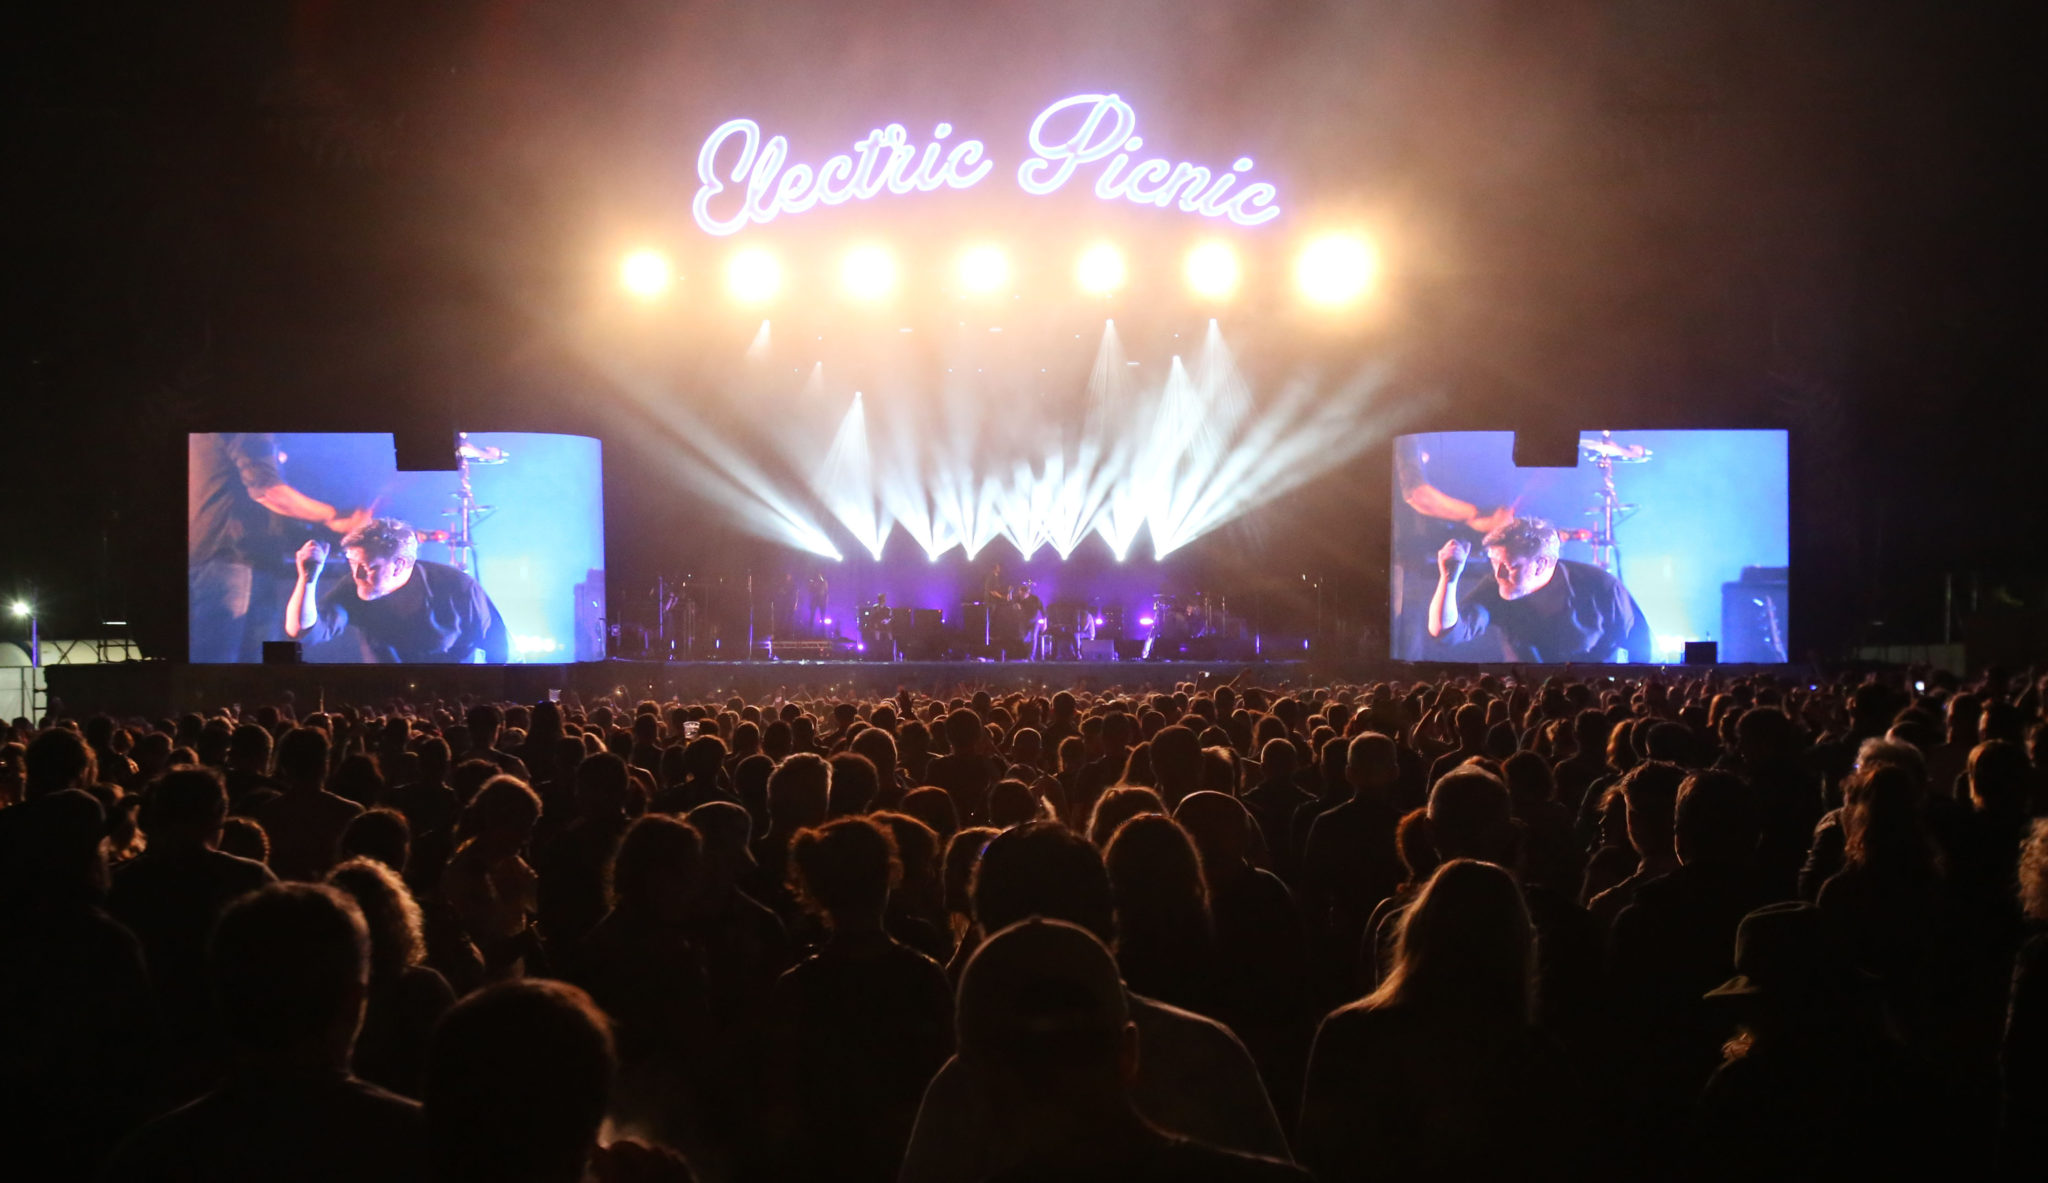 Electric Picnic Arctic Monkeys and Dermot Kennedy among headliners